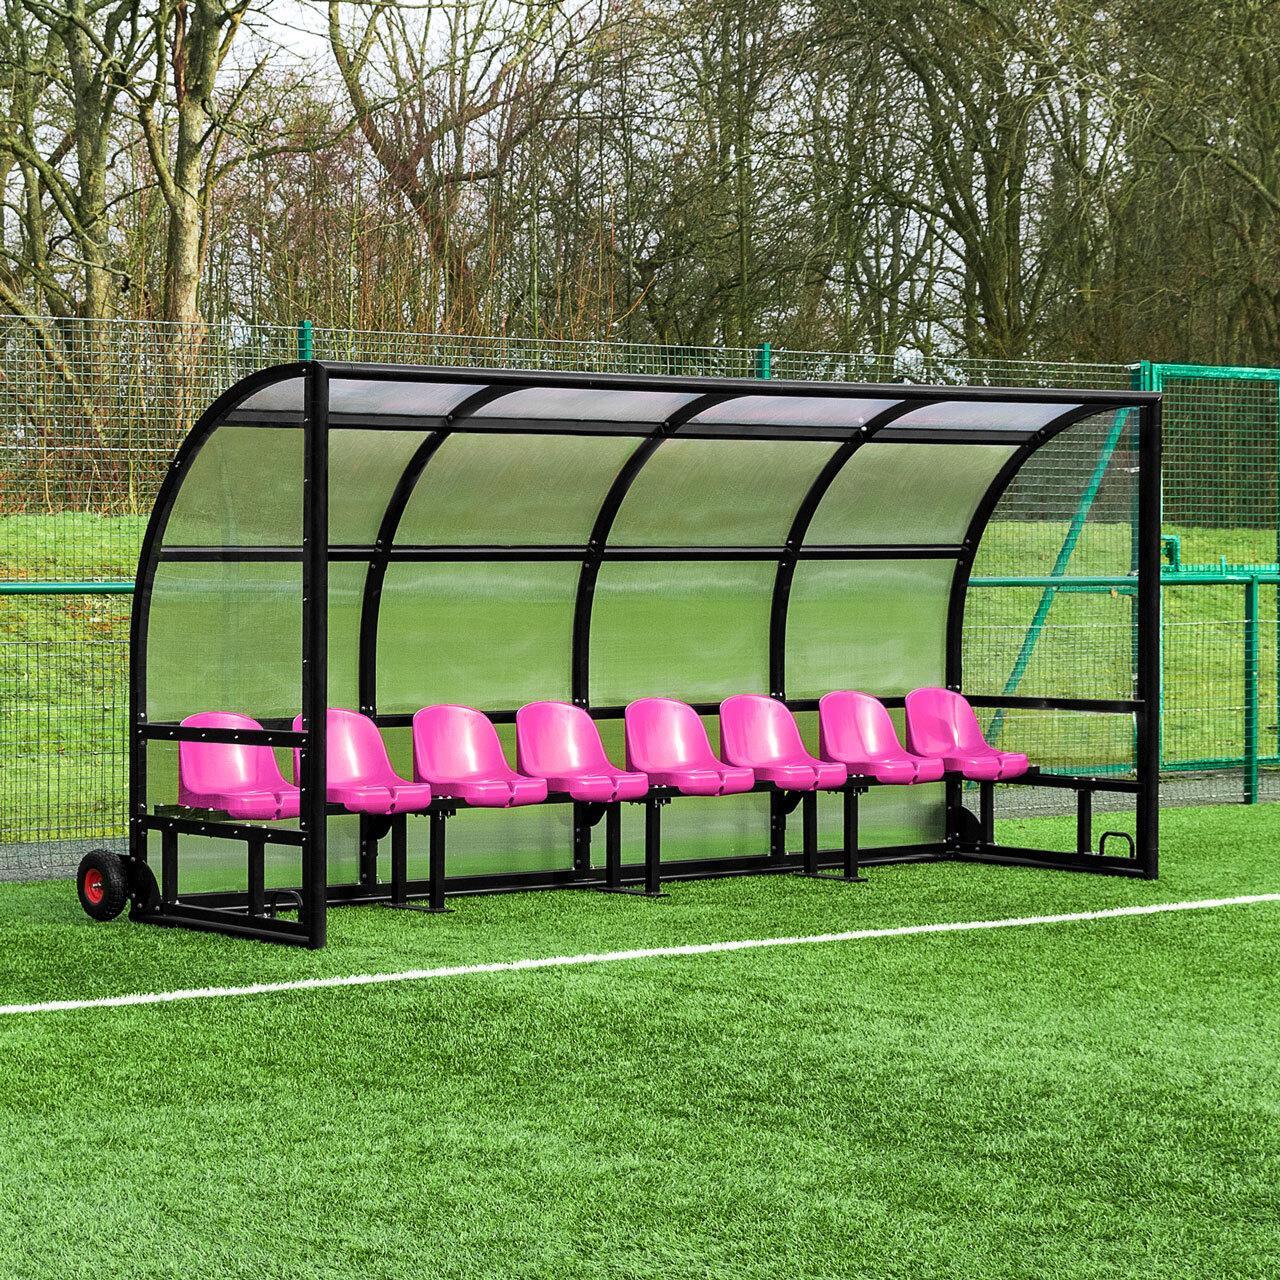 FORZA Alu60 Team Shelters [2 - 12 Seats] [Colour: Pink] [Shelter Length & Seats:: 6m Shelter | 12 Seats] [Wheel Options:: Without Wheels]